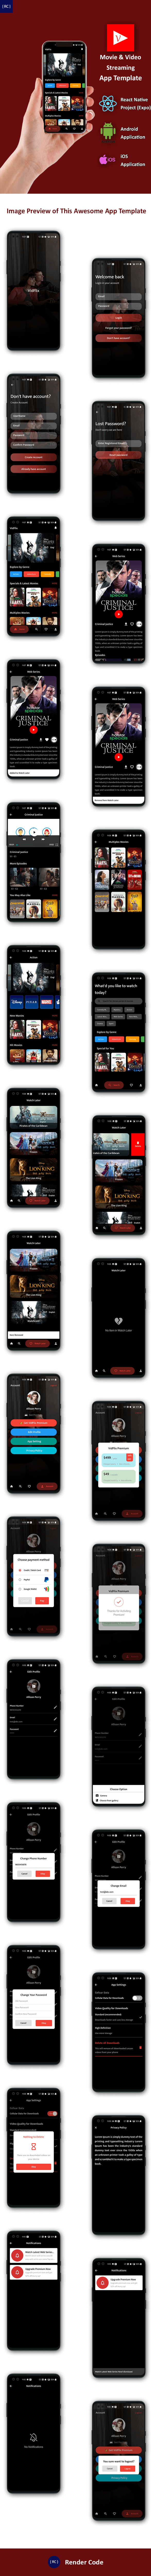 Movie Series Video Streaming Android App Template+ Video Streaming iOS App Template in React Native - 8